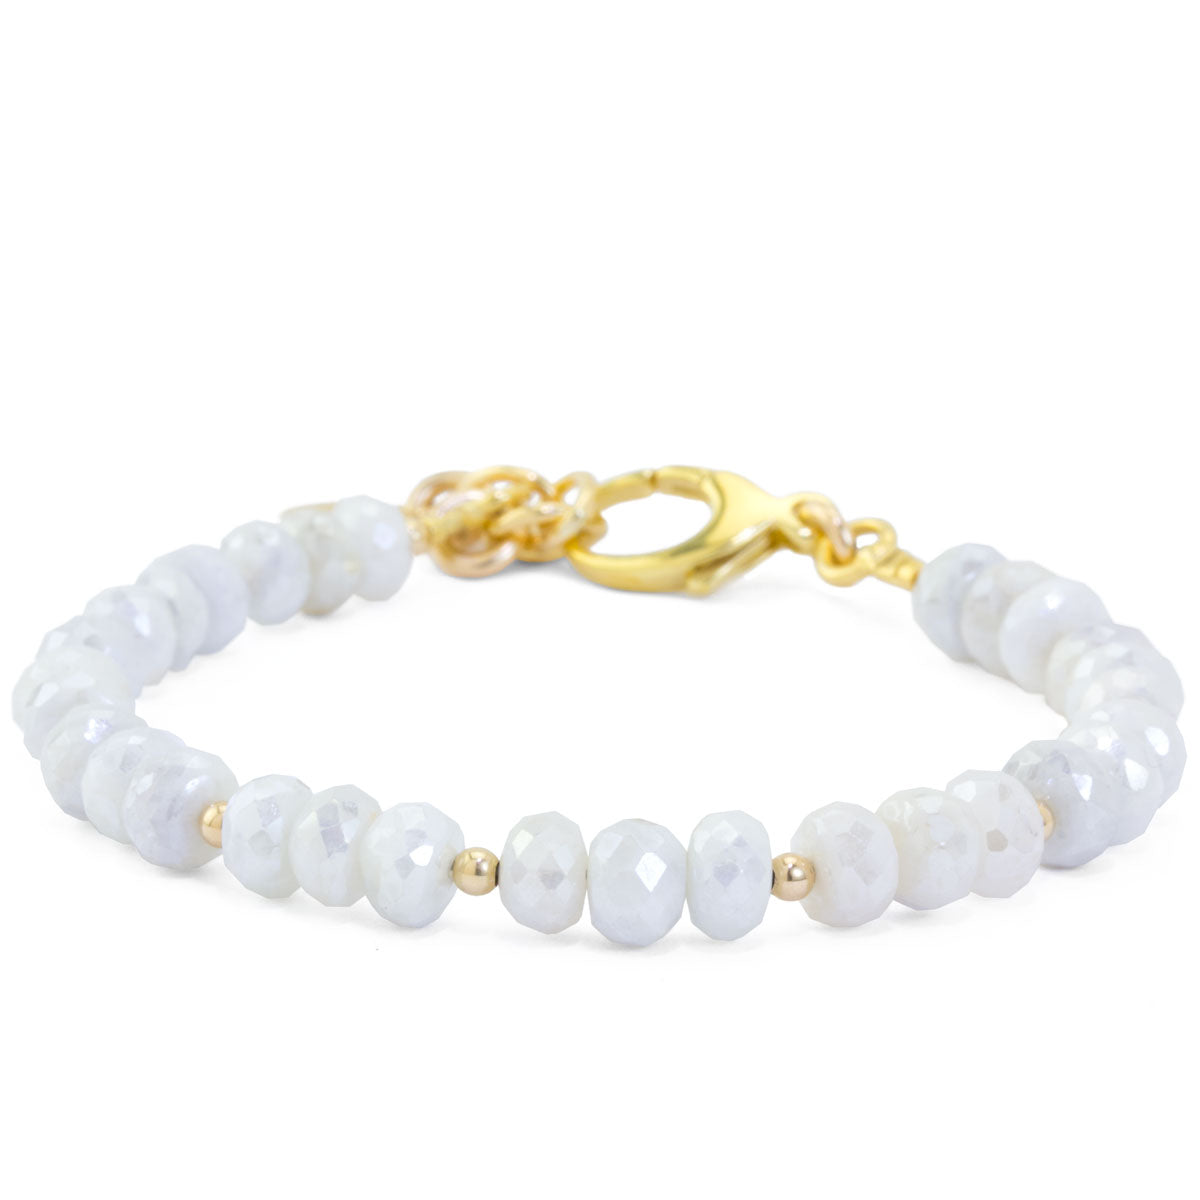 The Goddess Collection White Coated Silverite Bracelet